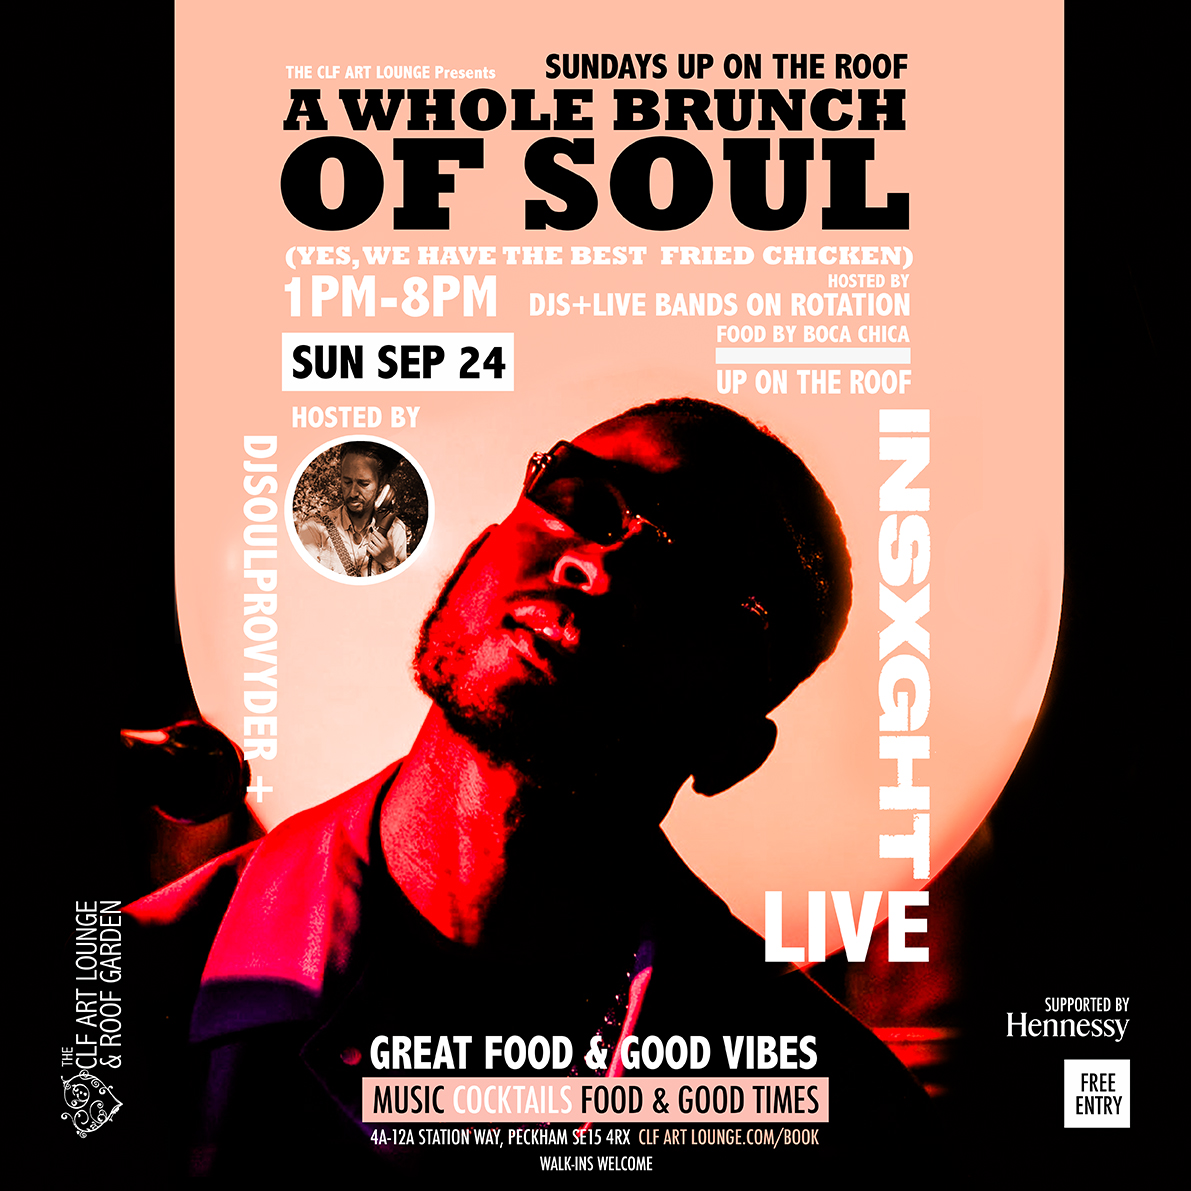 A Whole Brunch Of Soul. Sunday 24th Sept. Hosted by heavyweight DJSoulProvyder alongside South East London Pianist/Producer and Vocalist Insxght + Band who’ll be bringing pure soul jazz fuelled fire (live) Free Entry!

clfartlounge.com/book to book your table.